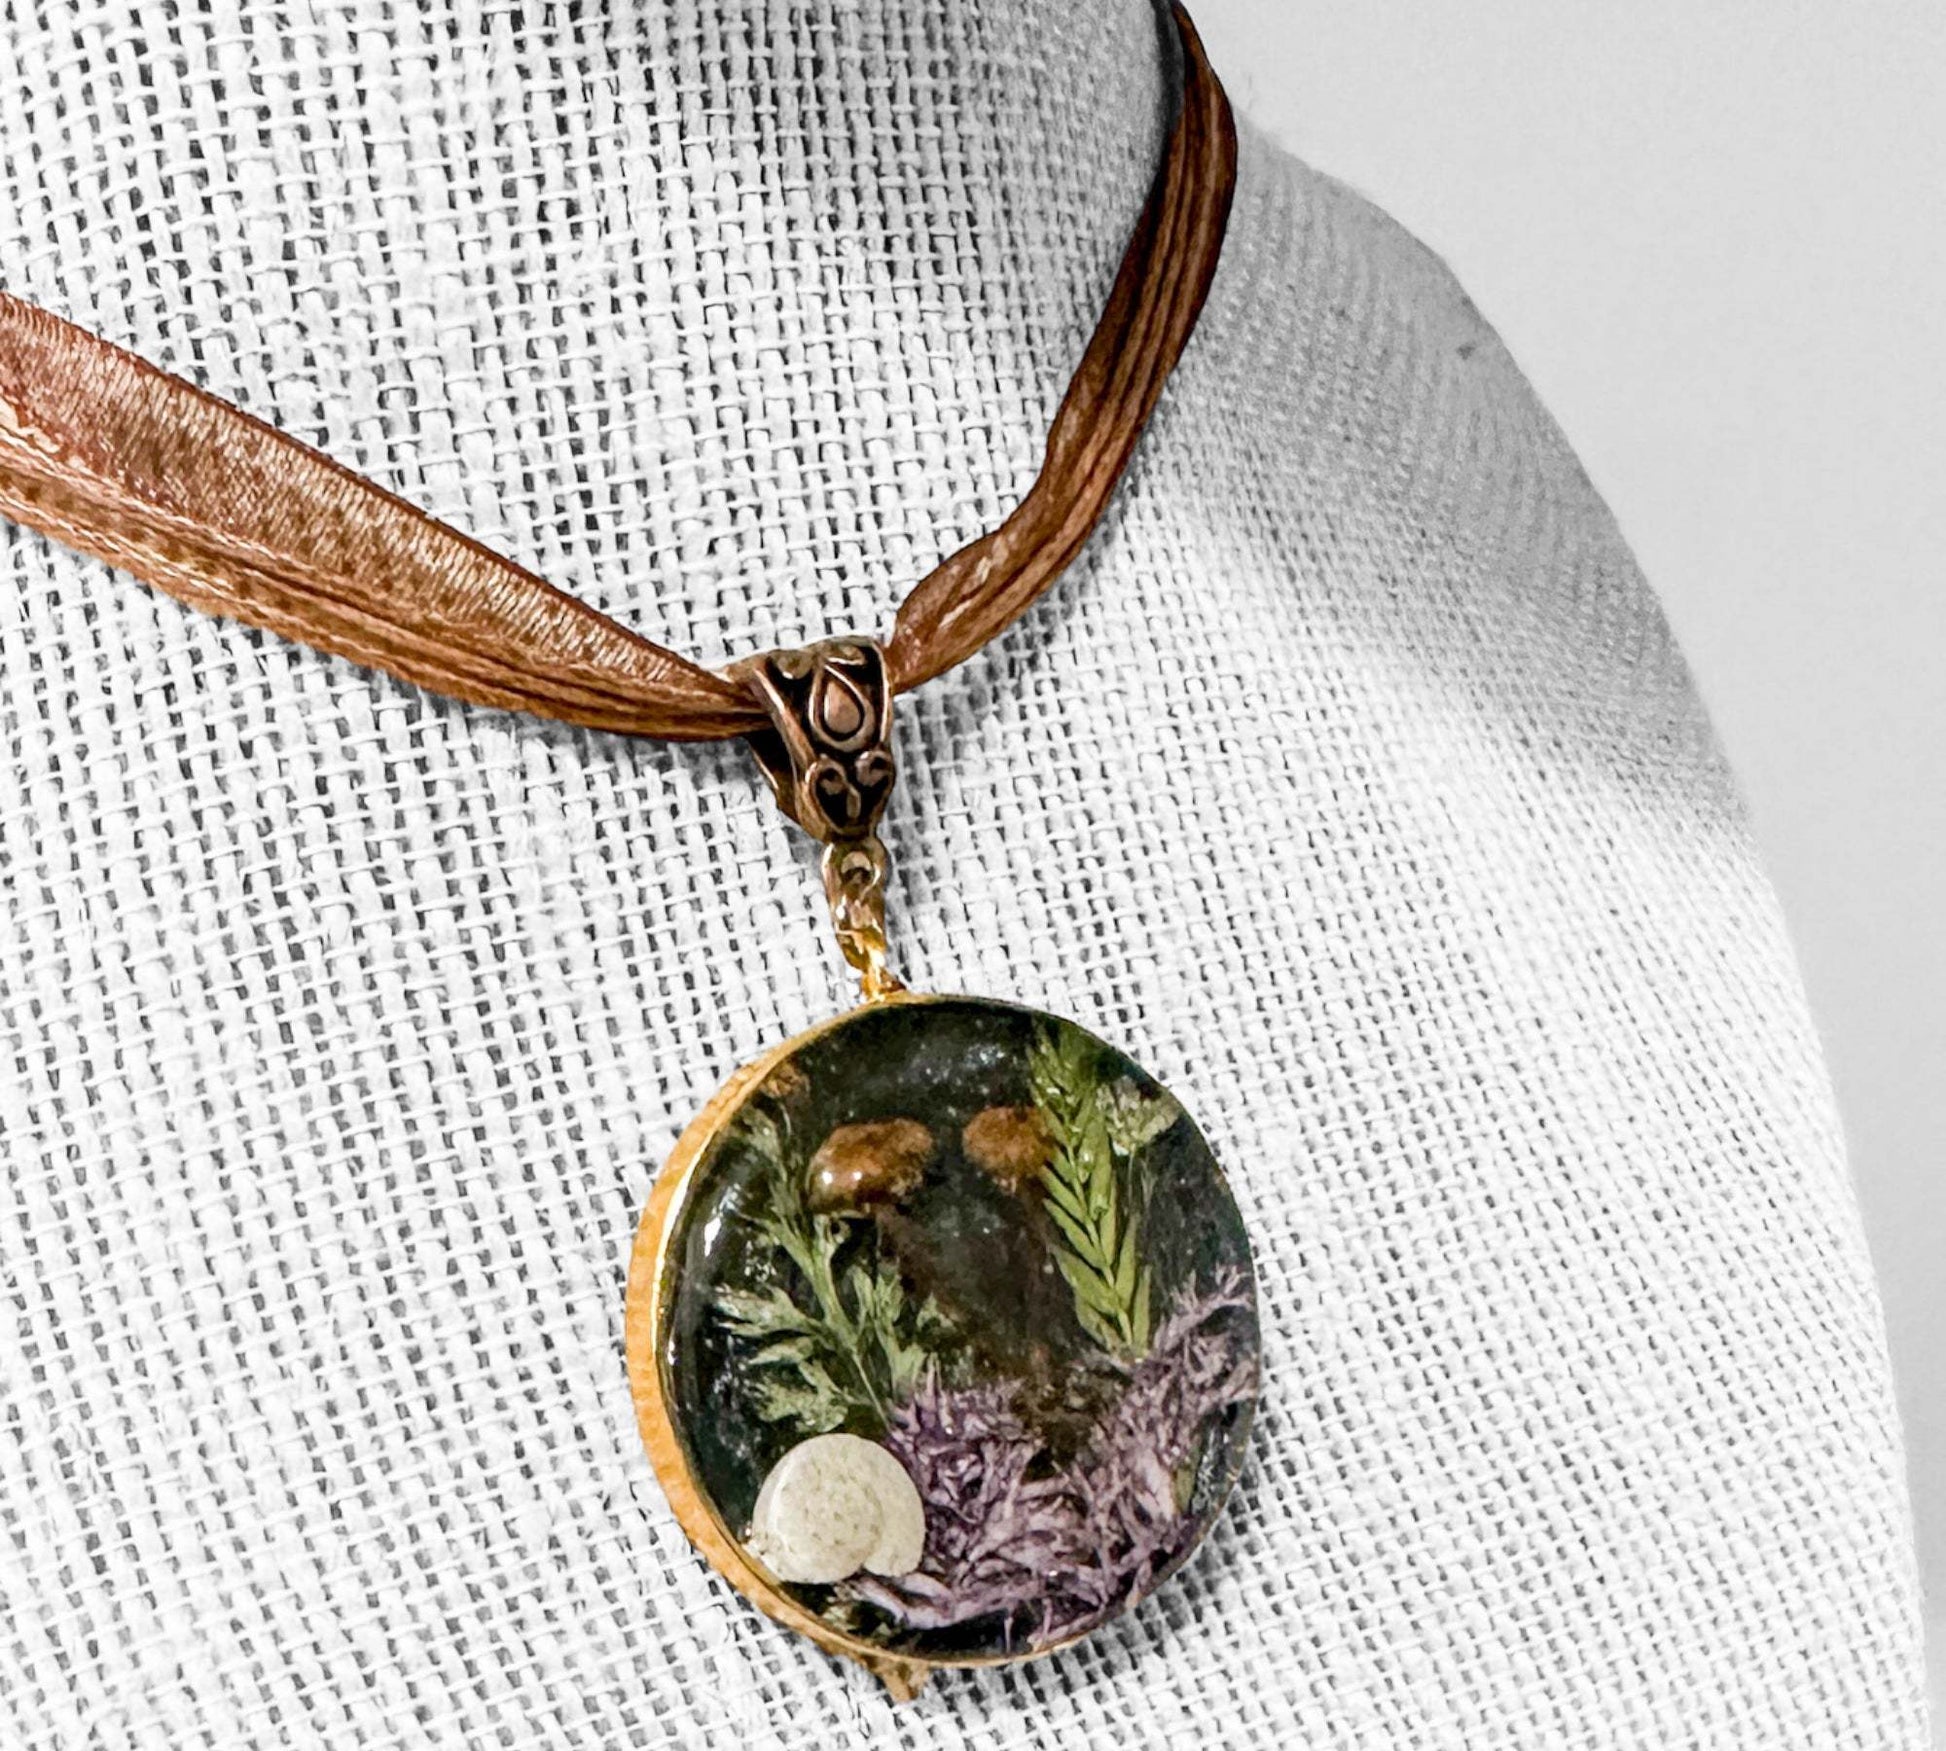 Forest at Night - Resin Botanical Necklace with Mini Mushrooms & Ferns